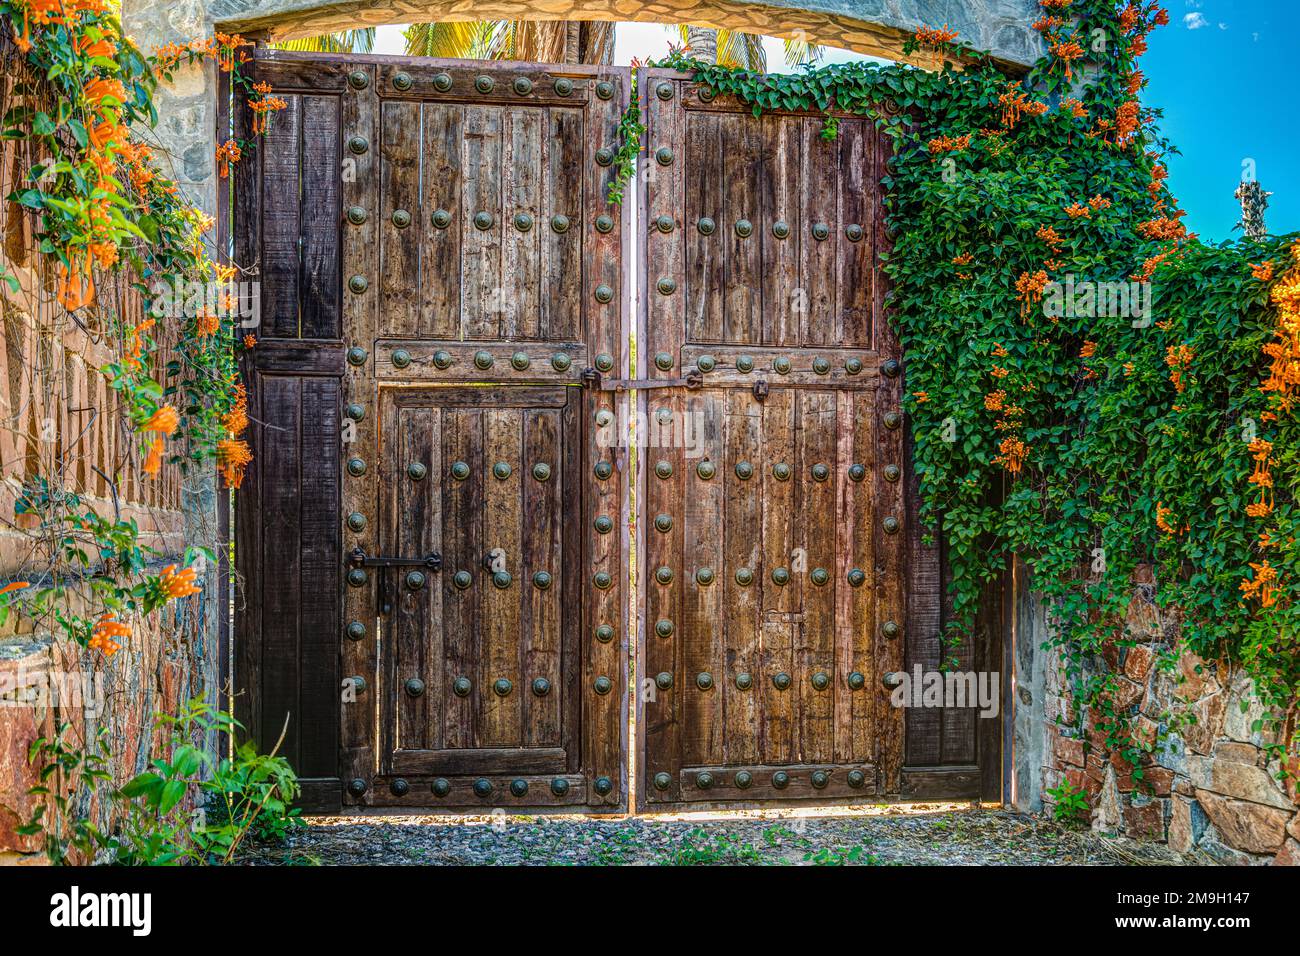 Wooden gate and Mexican flame vine (Pseudogynoxys chenopodioides), Baja California Sur, Mexico Stock Photo